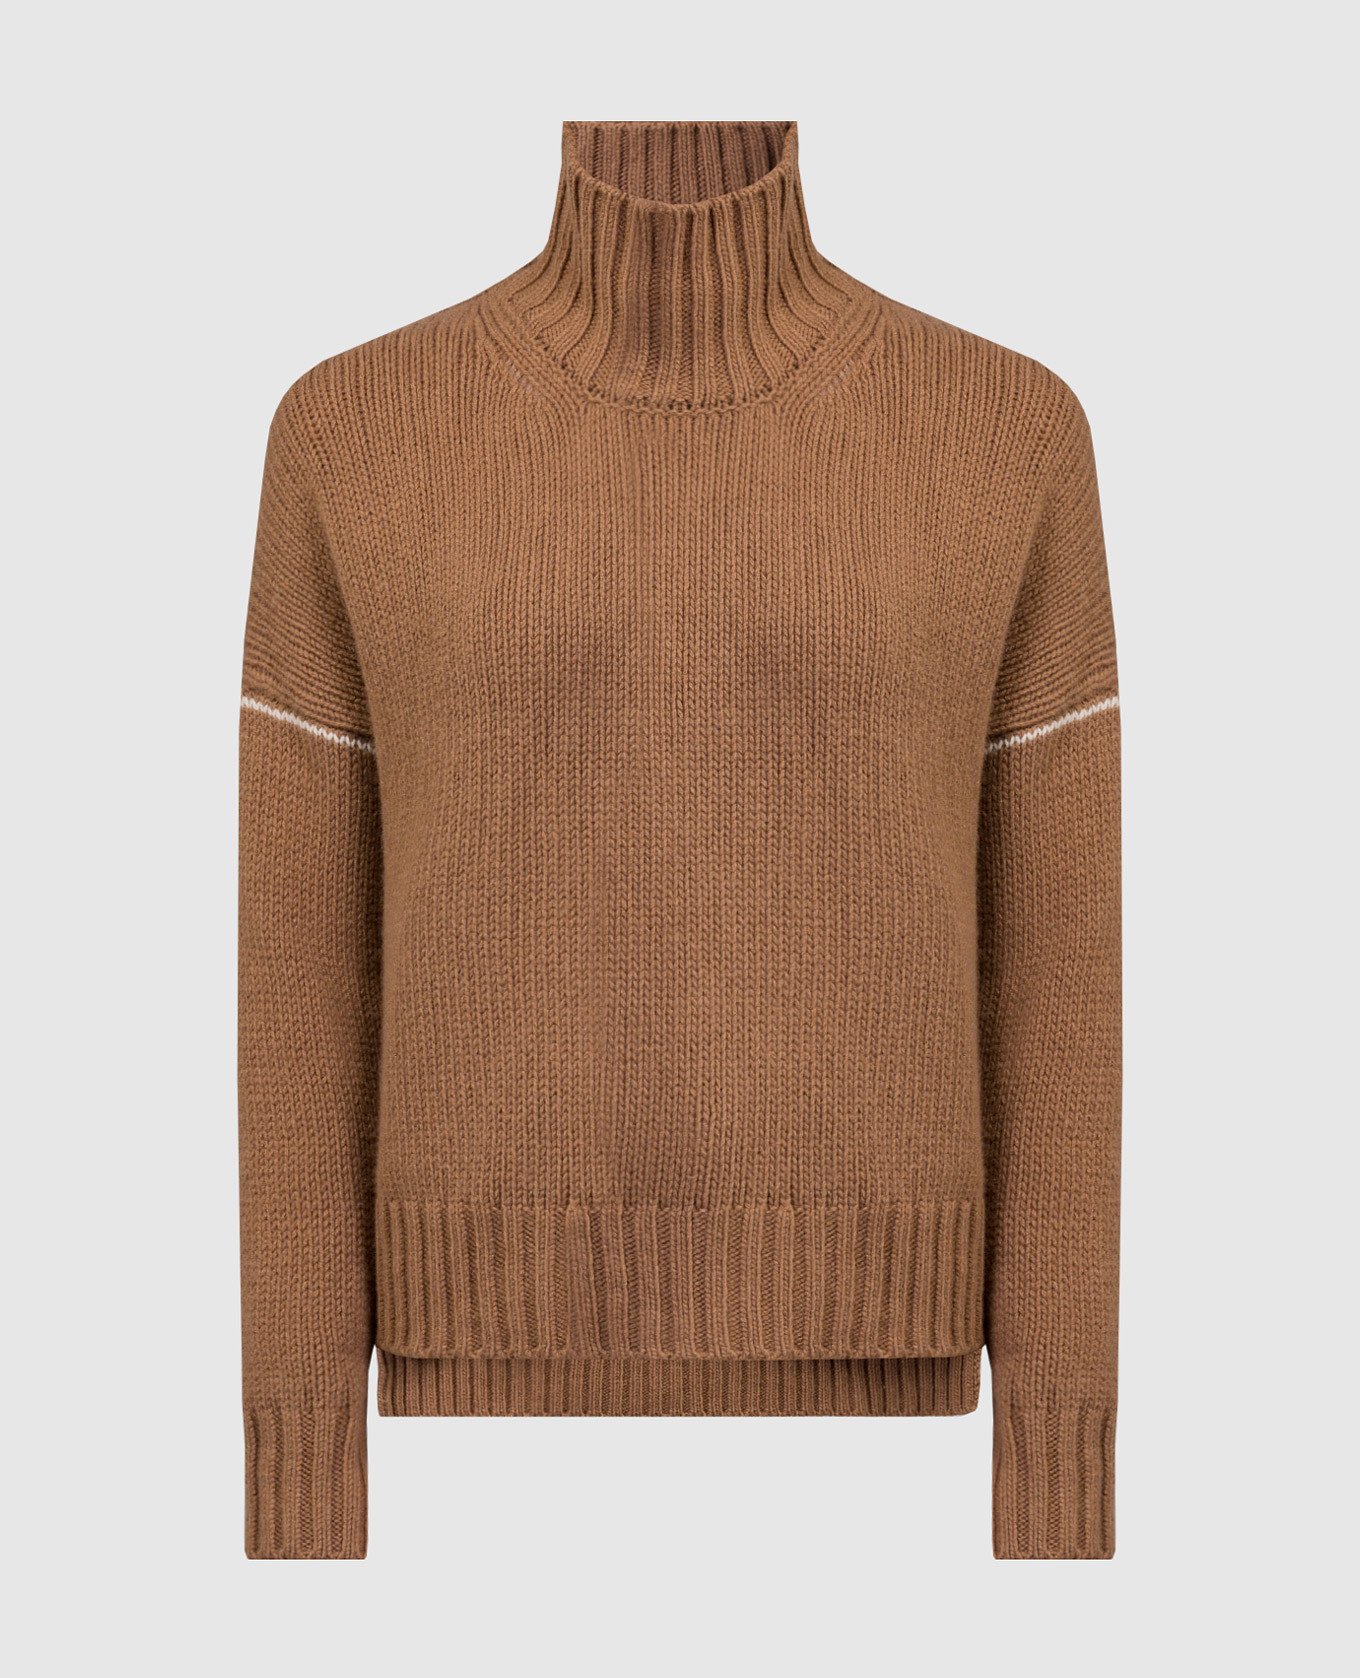 Brown sweater made of wool